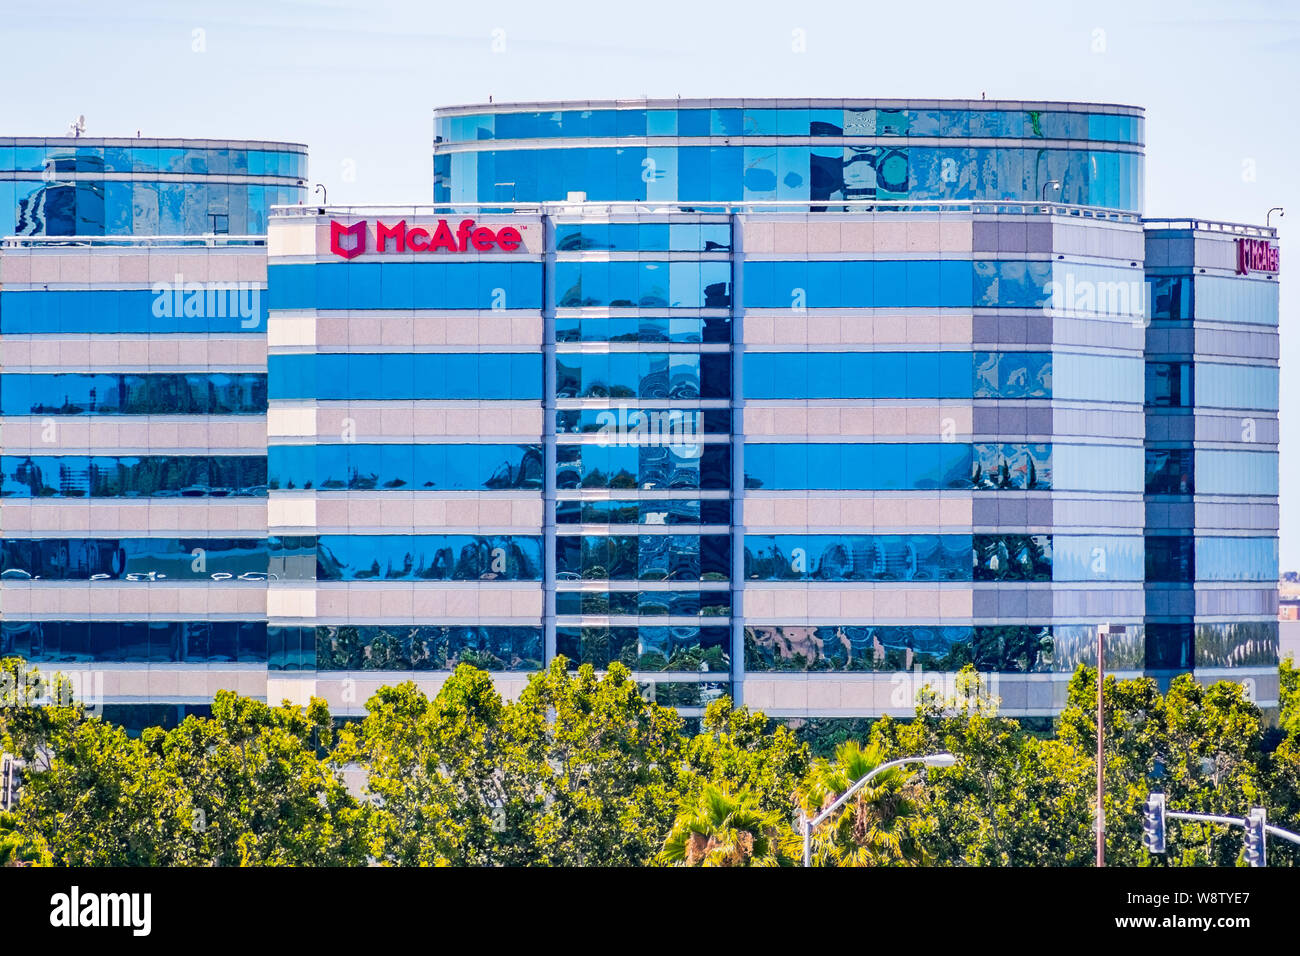 August 9, 2019 Santa Clara / CA / USA - McAfee HQ in Silicon Valley; McAfee, LLC is an American global computer security software company; it is curre Stock Photo